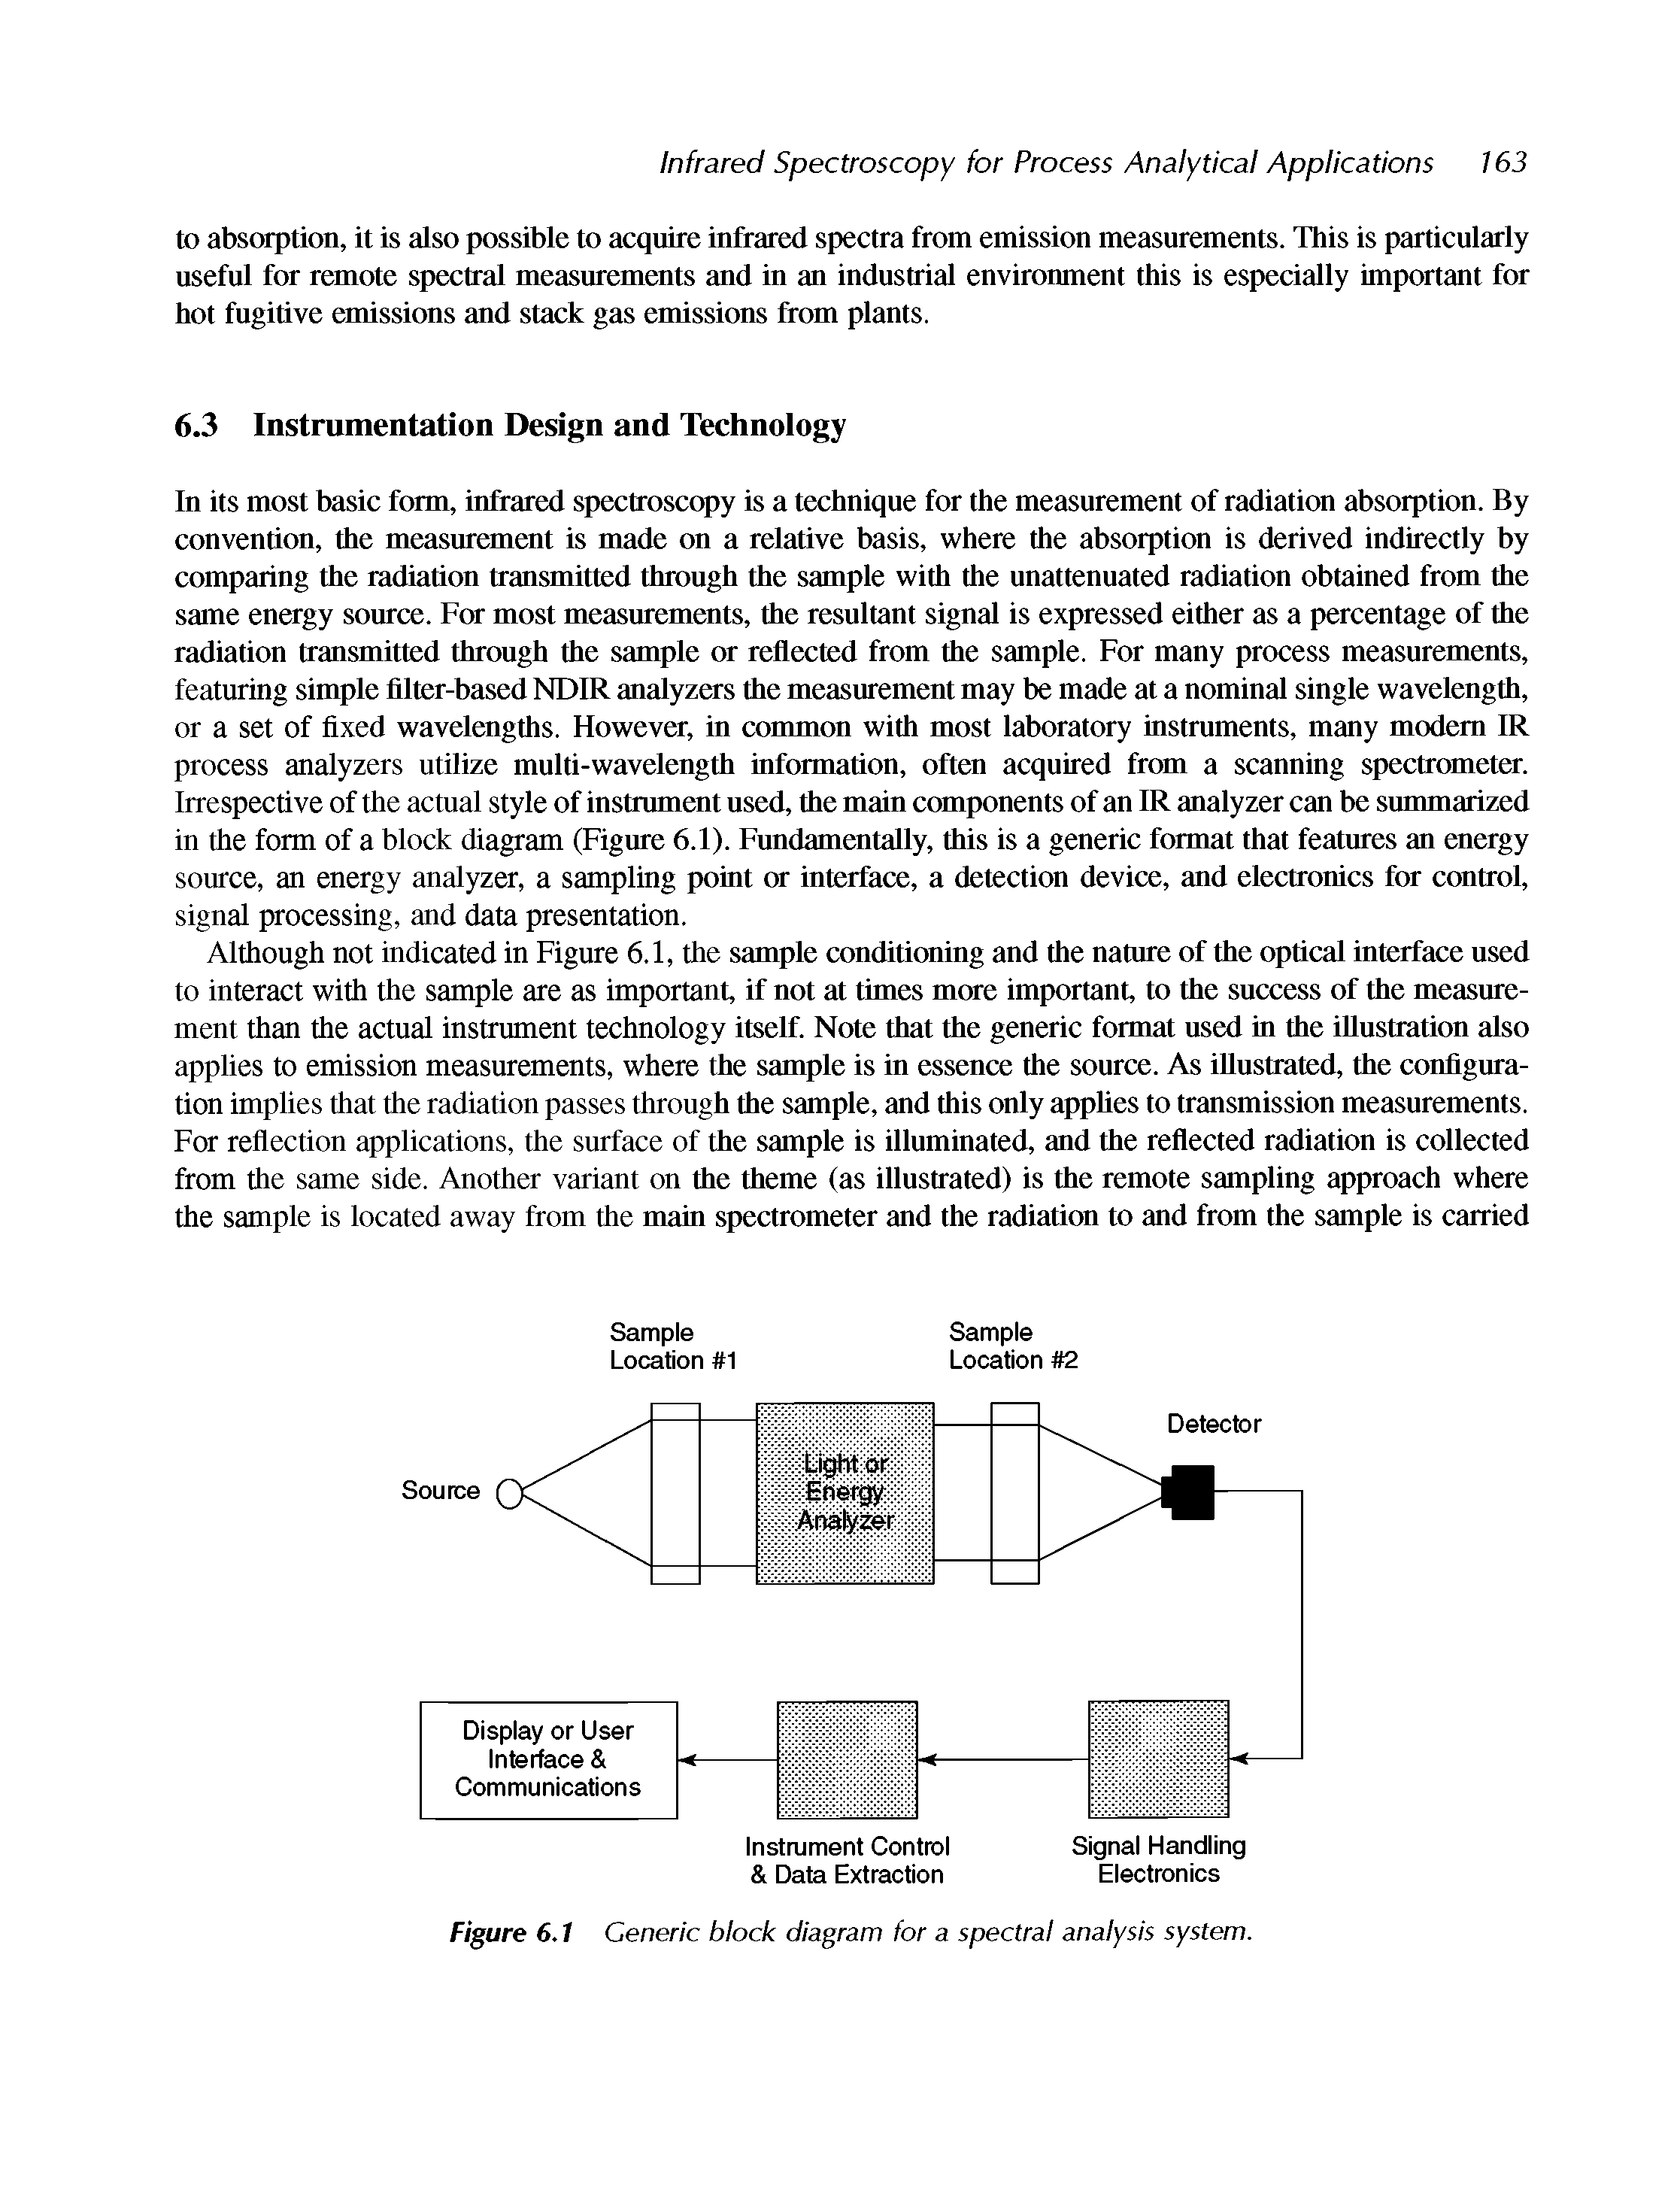 Figure 6.1 Generic block diagram for a spectral analysis system.